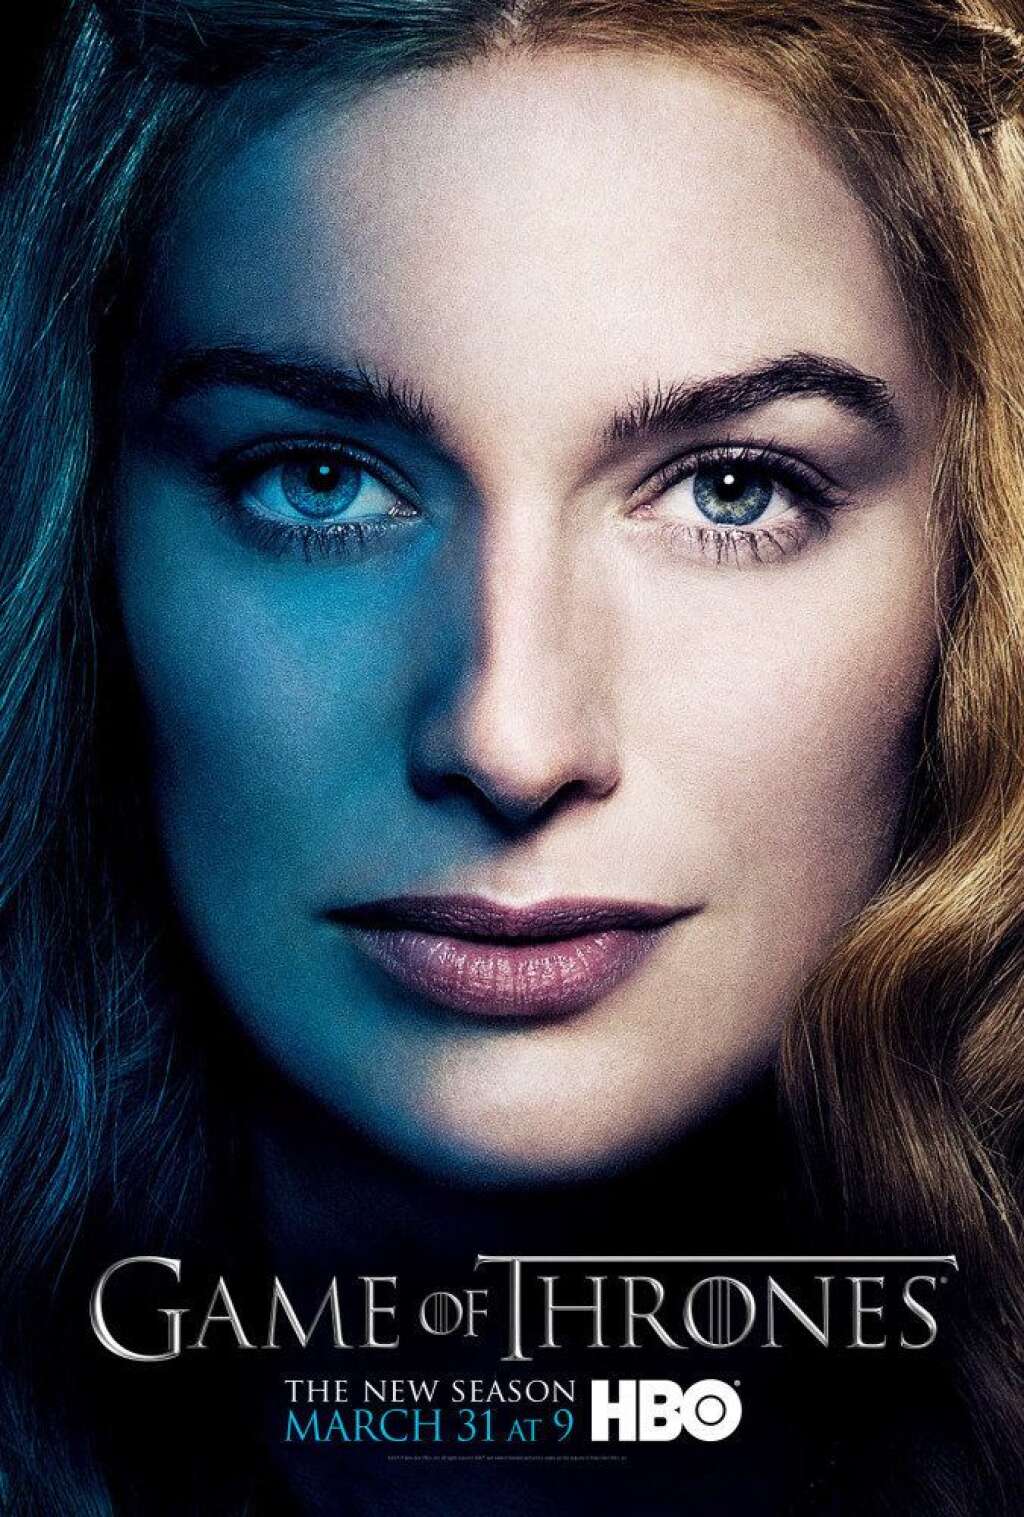 'Game of Thrones' Character Posters - Lena Headey as Cersei Lannister.